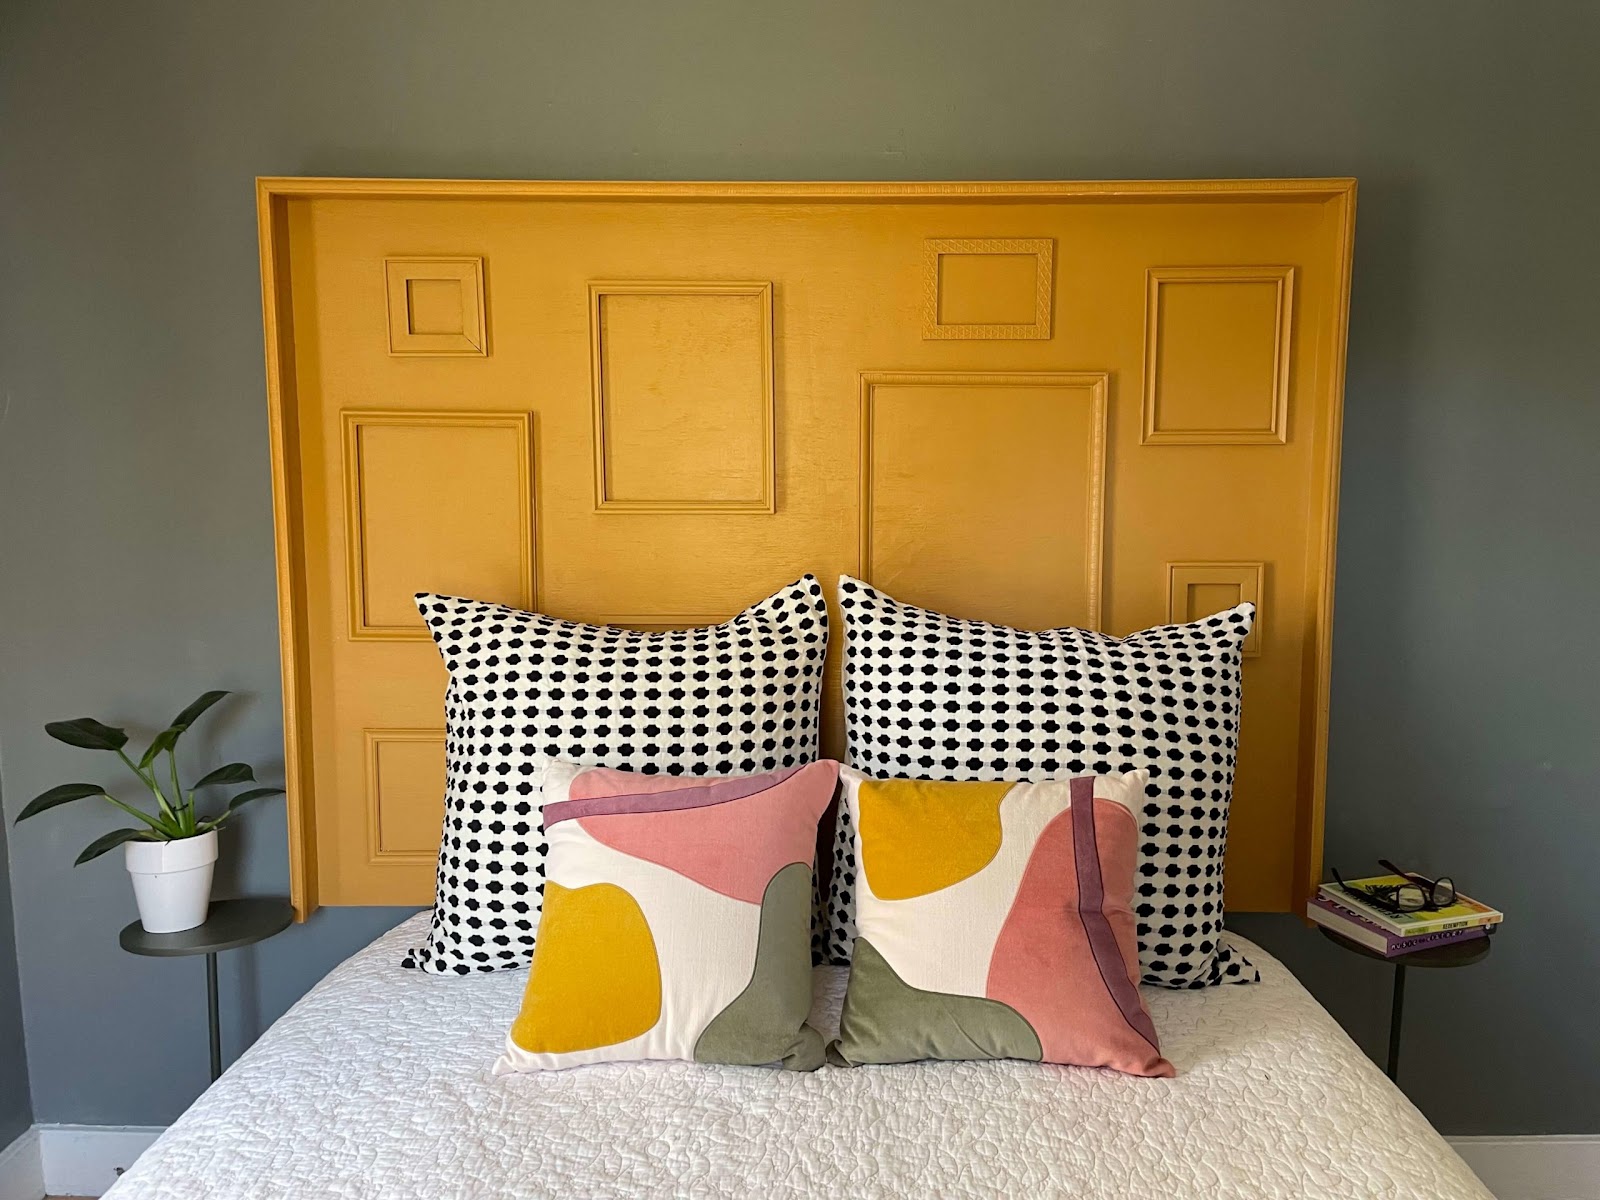 DIY Headboard made from plywood and frames